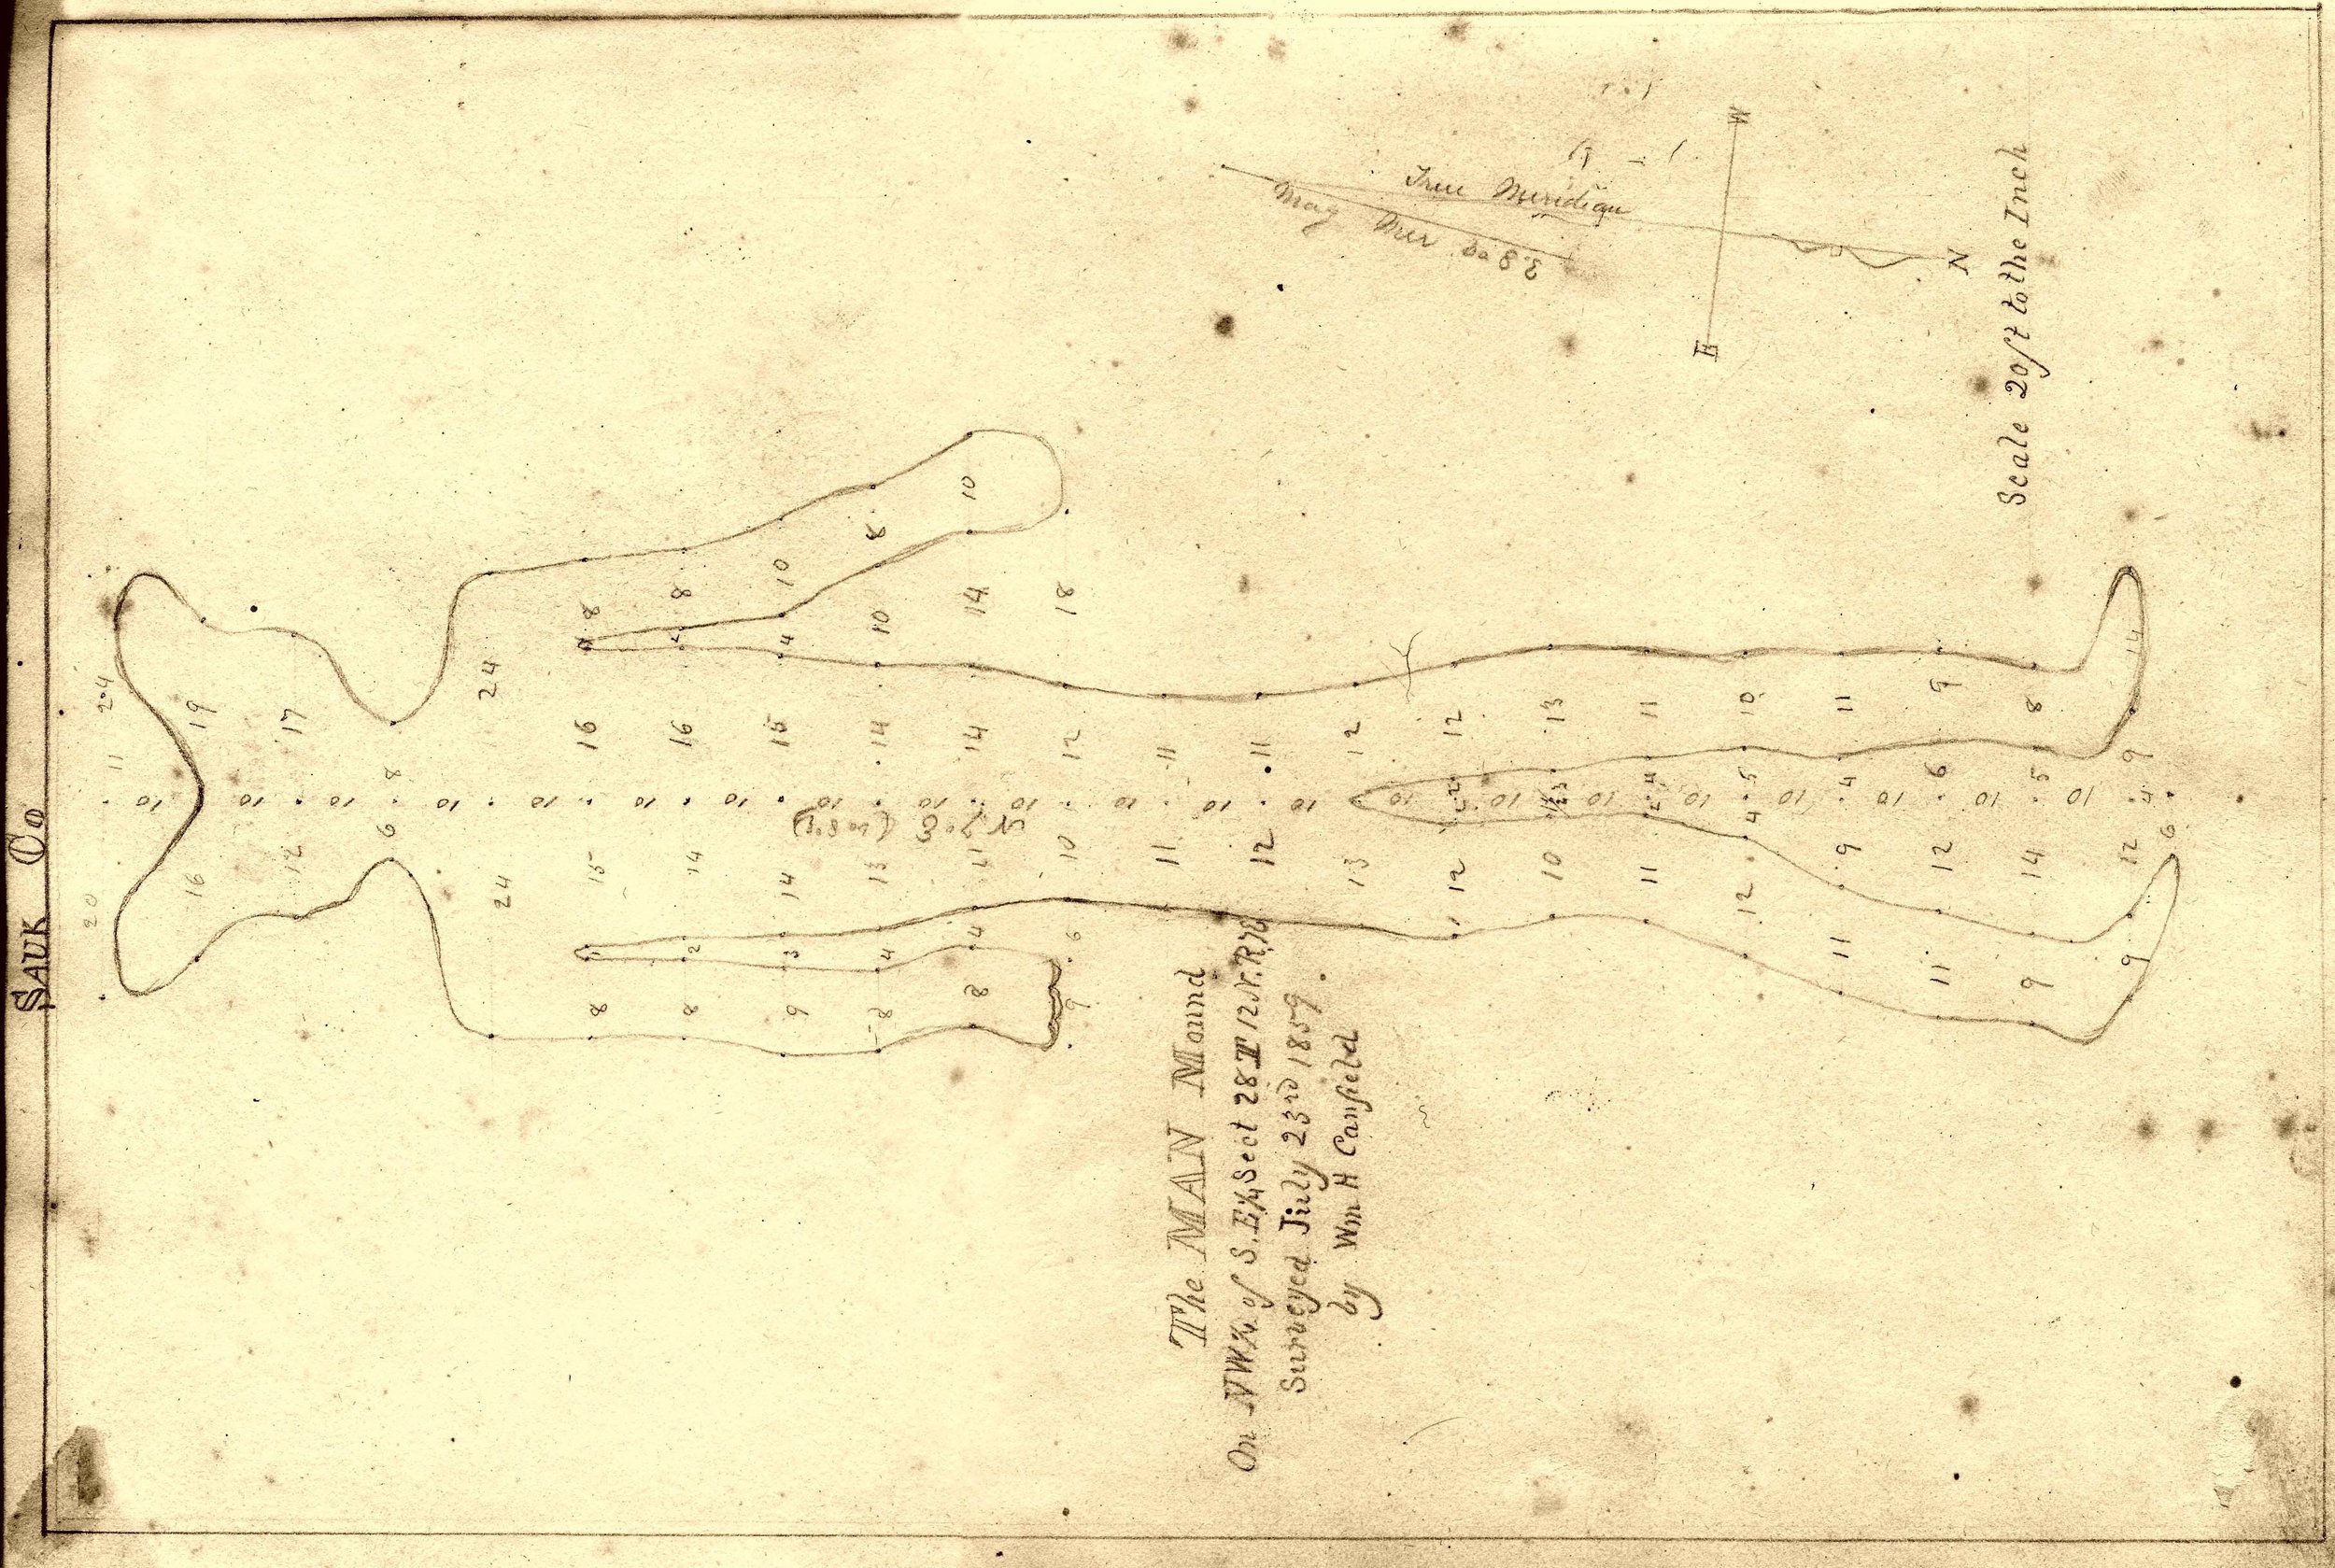 1859+Drawing+of+Man+Mound+by+Canfield.jpg